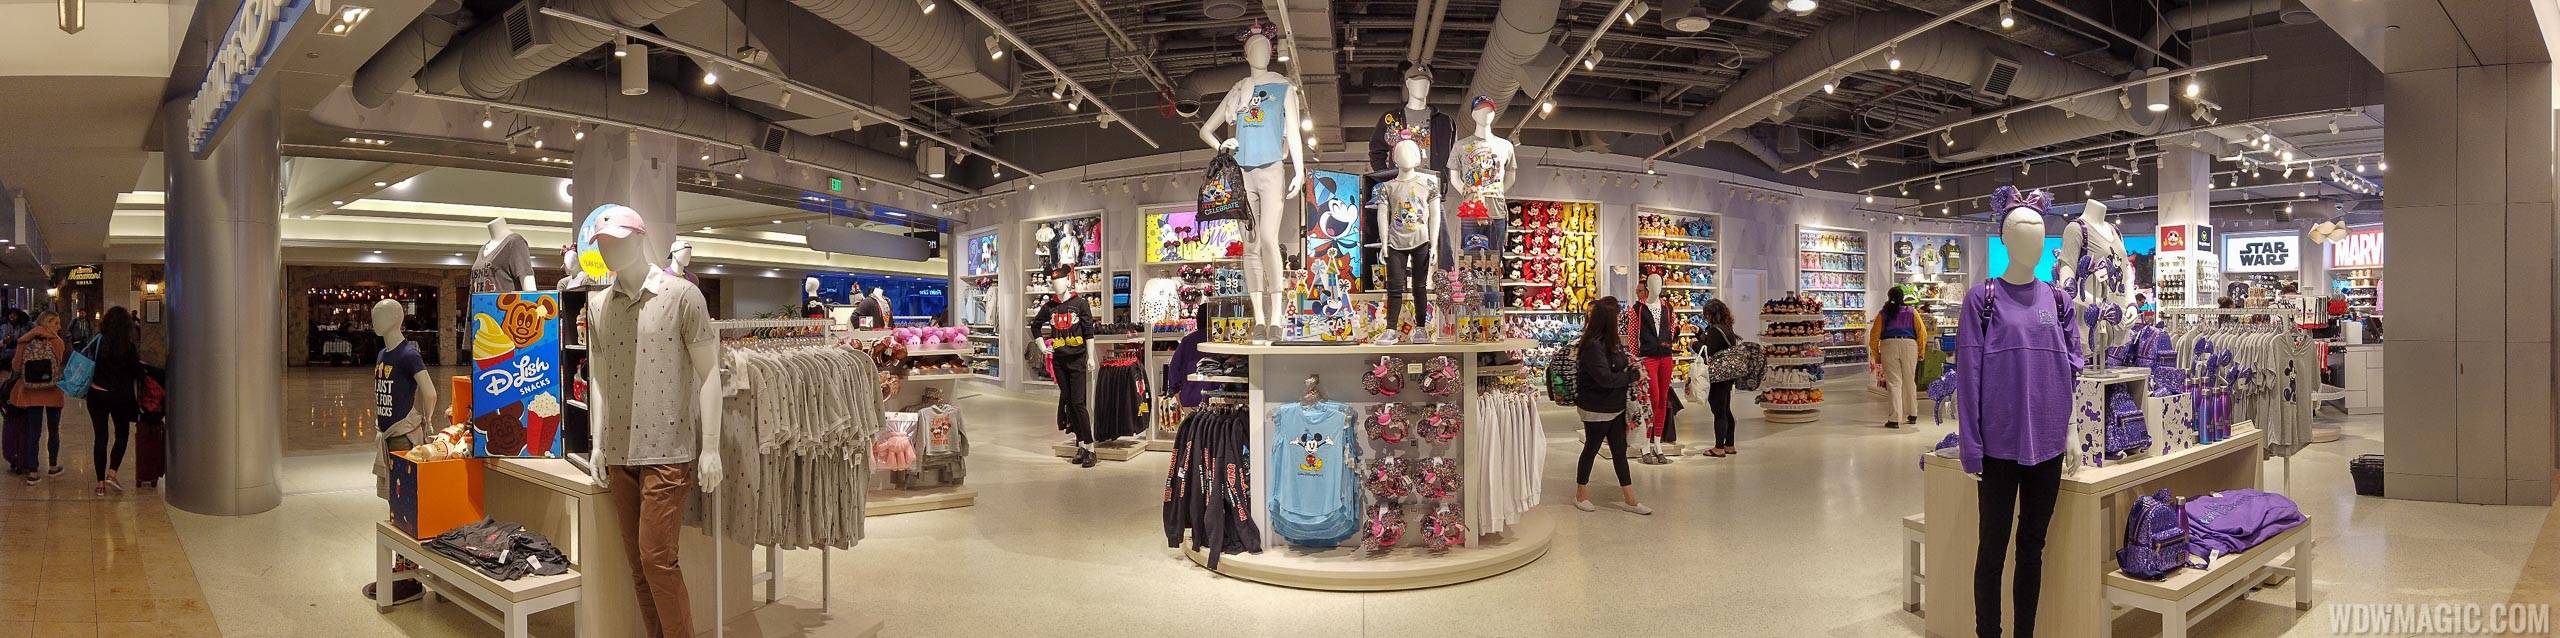 VIDEO - Tour the new Magic of Disney store at Orlando International Airport